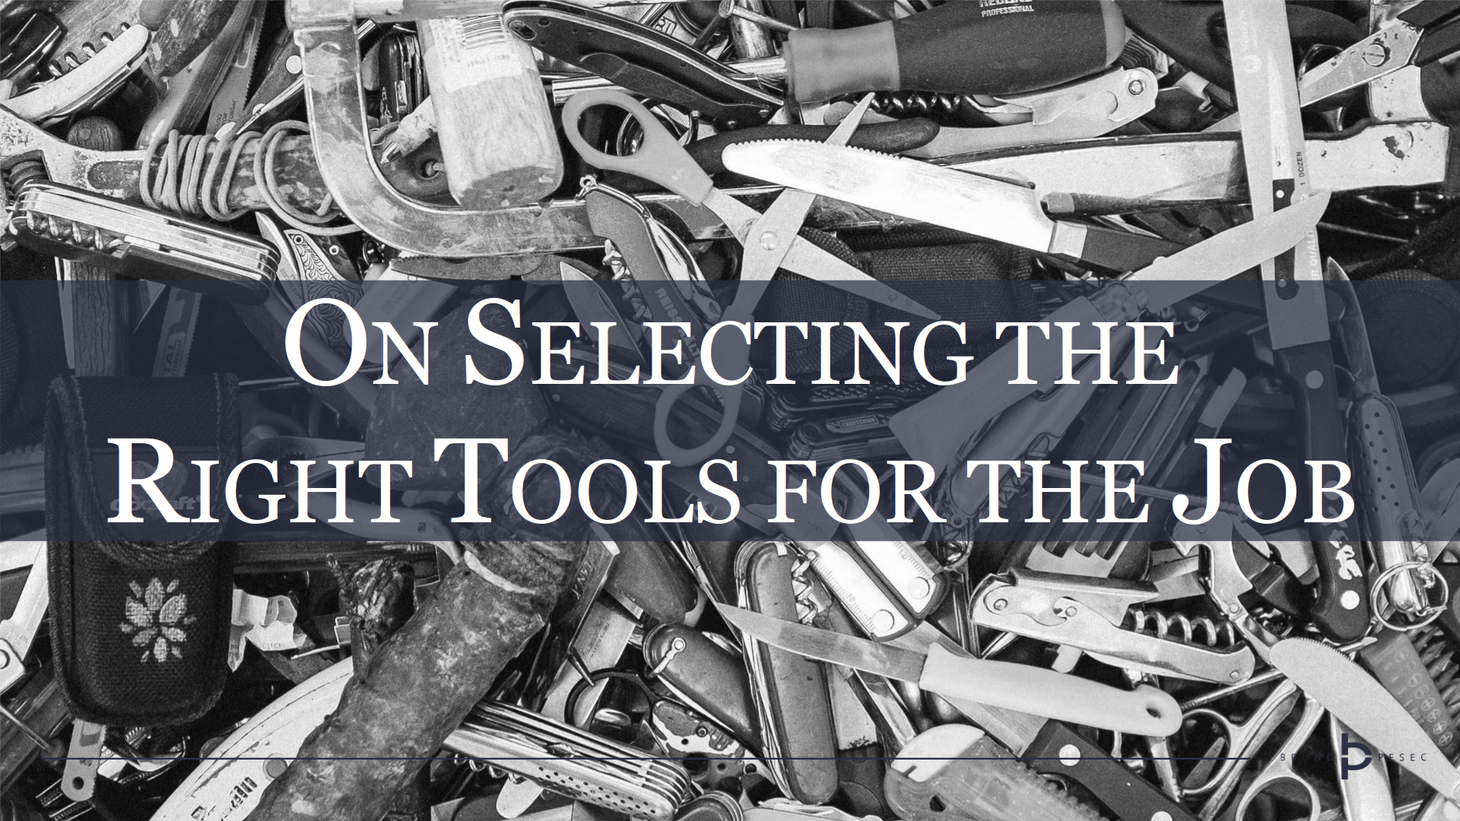 On selecting the right tools for the job